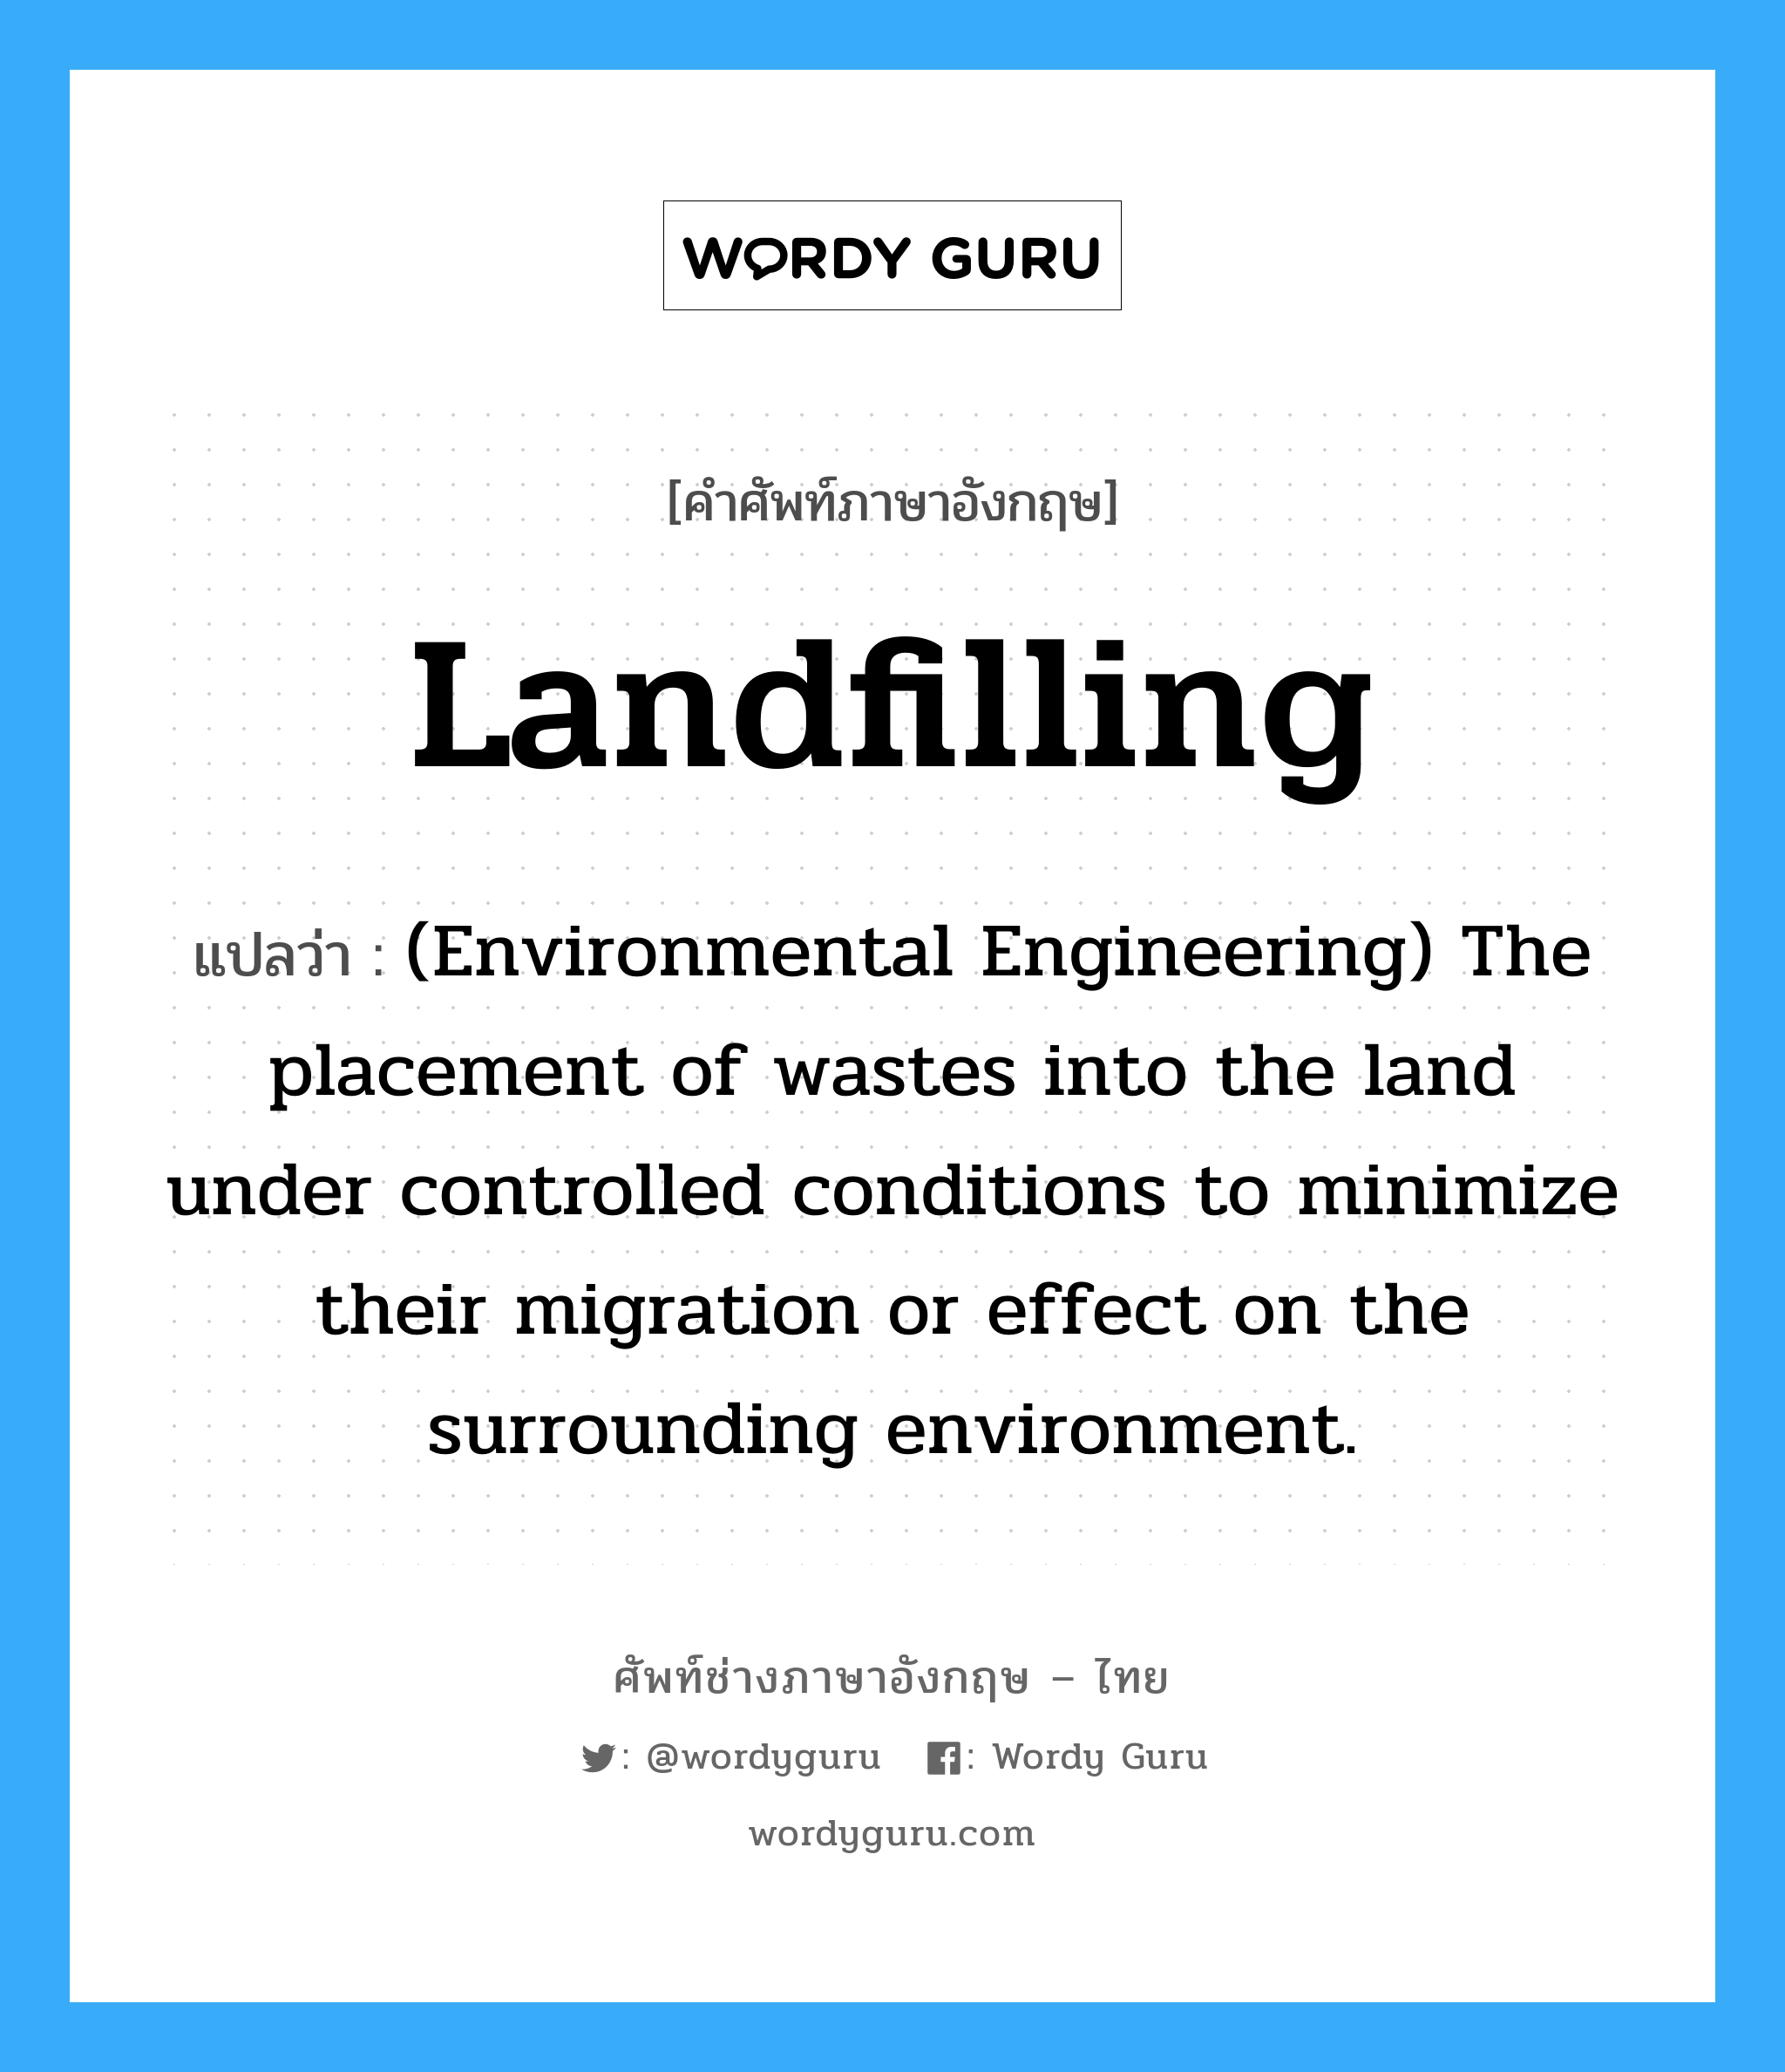 (Environmental Engineering) The placement of wastes into the land under controlled conditions to minimize their migration or effect on the surrounding environment. ภาษาอังกฤษ?, คำศัพท์ช่างภาษาอังกฤษ - ไทย (Environmental Engineering) The placement of wastes into the land under controlled conditions to minimize their migration or effect on the surrounding environment. คำศัพท์ภาษาอังกฤษ (Environmental Engineering) The placement of wastes into the land under controlled conditions to minimize their migration or effect on the surrounding environment. แปลว่า Landfilling